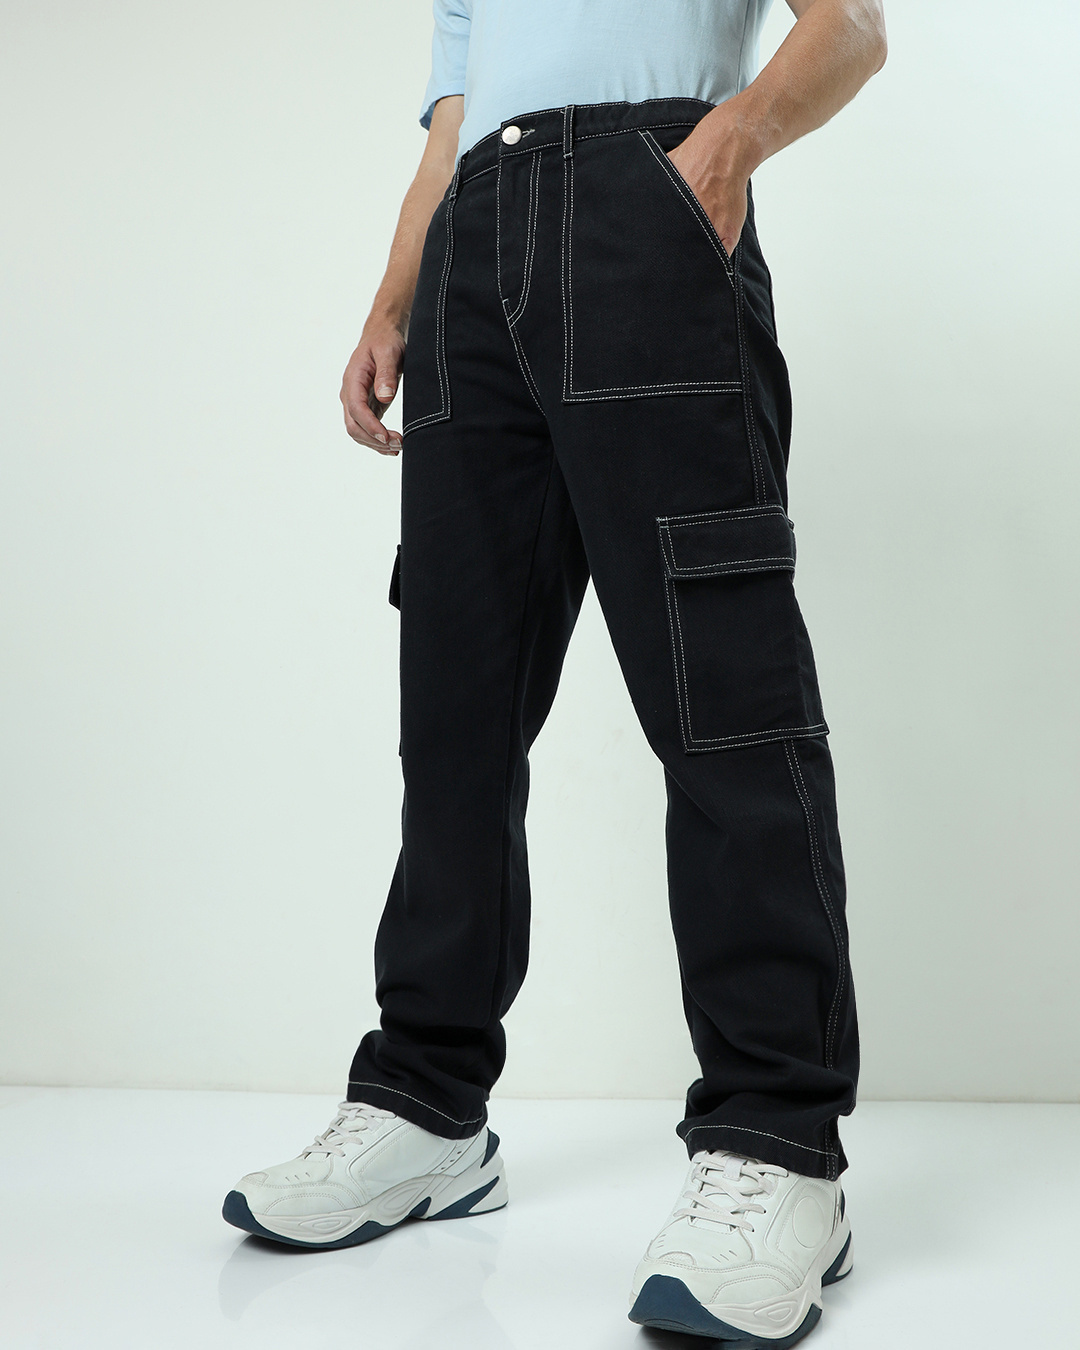 Buy Men's Black Relaxed Fit Cargo Jeans Online at Bewakoof